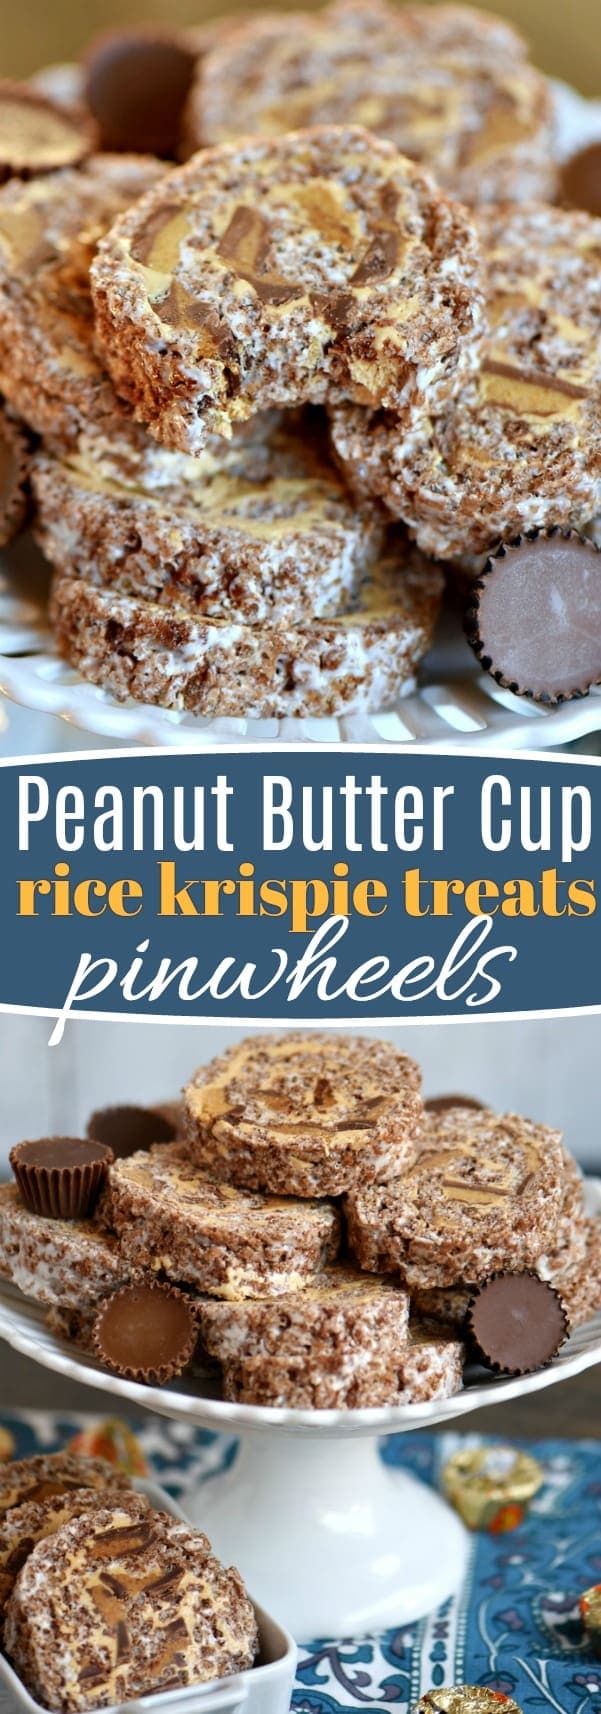 These Peanut Butter Cup Rice Krispie Treats Pinwheels are my new favorite treat and sure to be a hit with the peanut butter lover in your life. Layers of chocolate, marshmallow, peanut butter and peanut butter cups are rolled up into an irresistible dessert! Great for parties! // Mom On Timeout